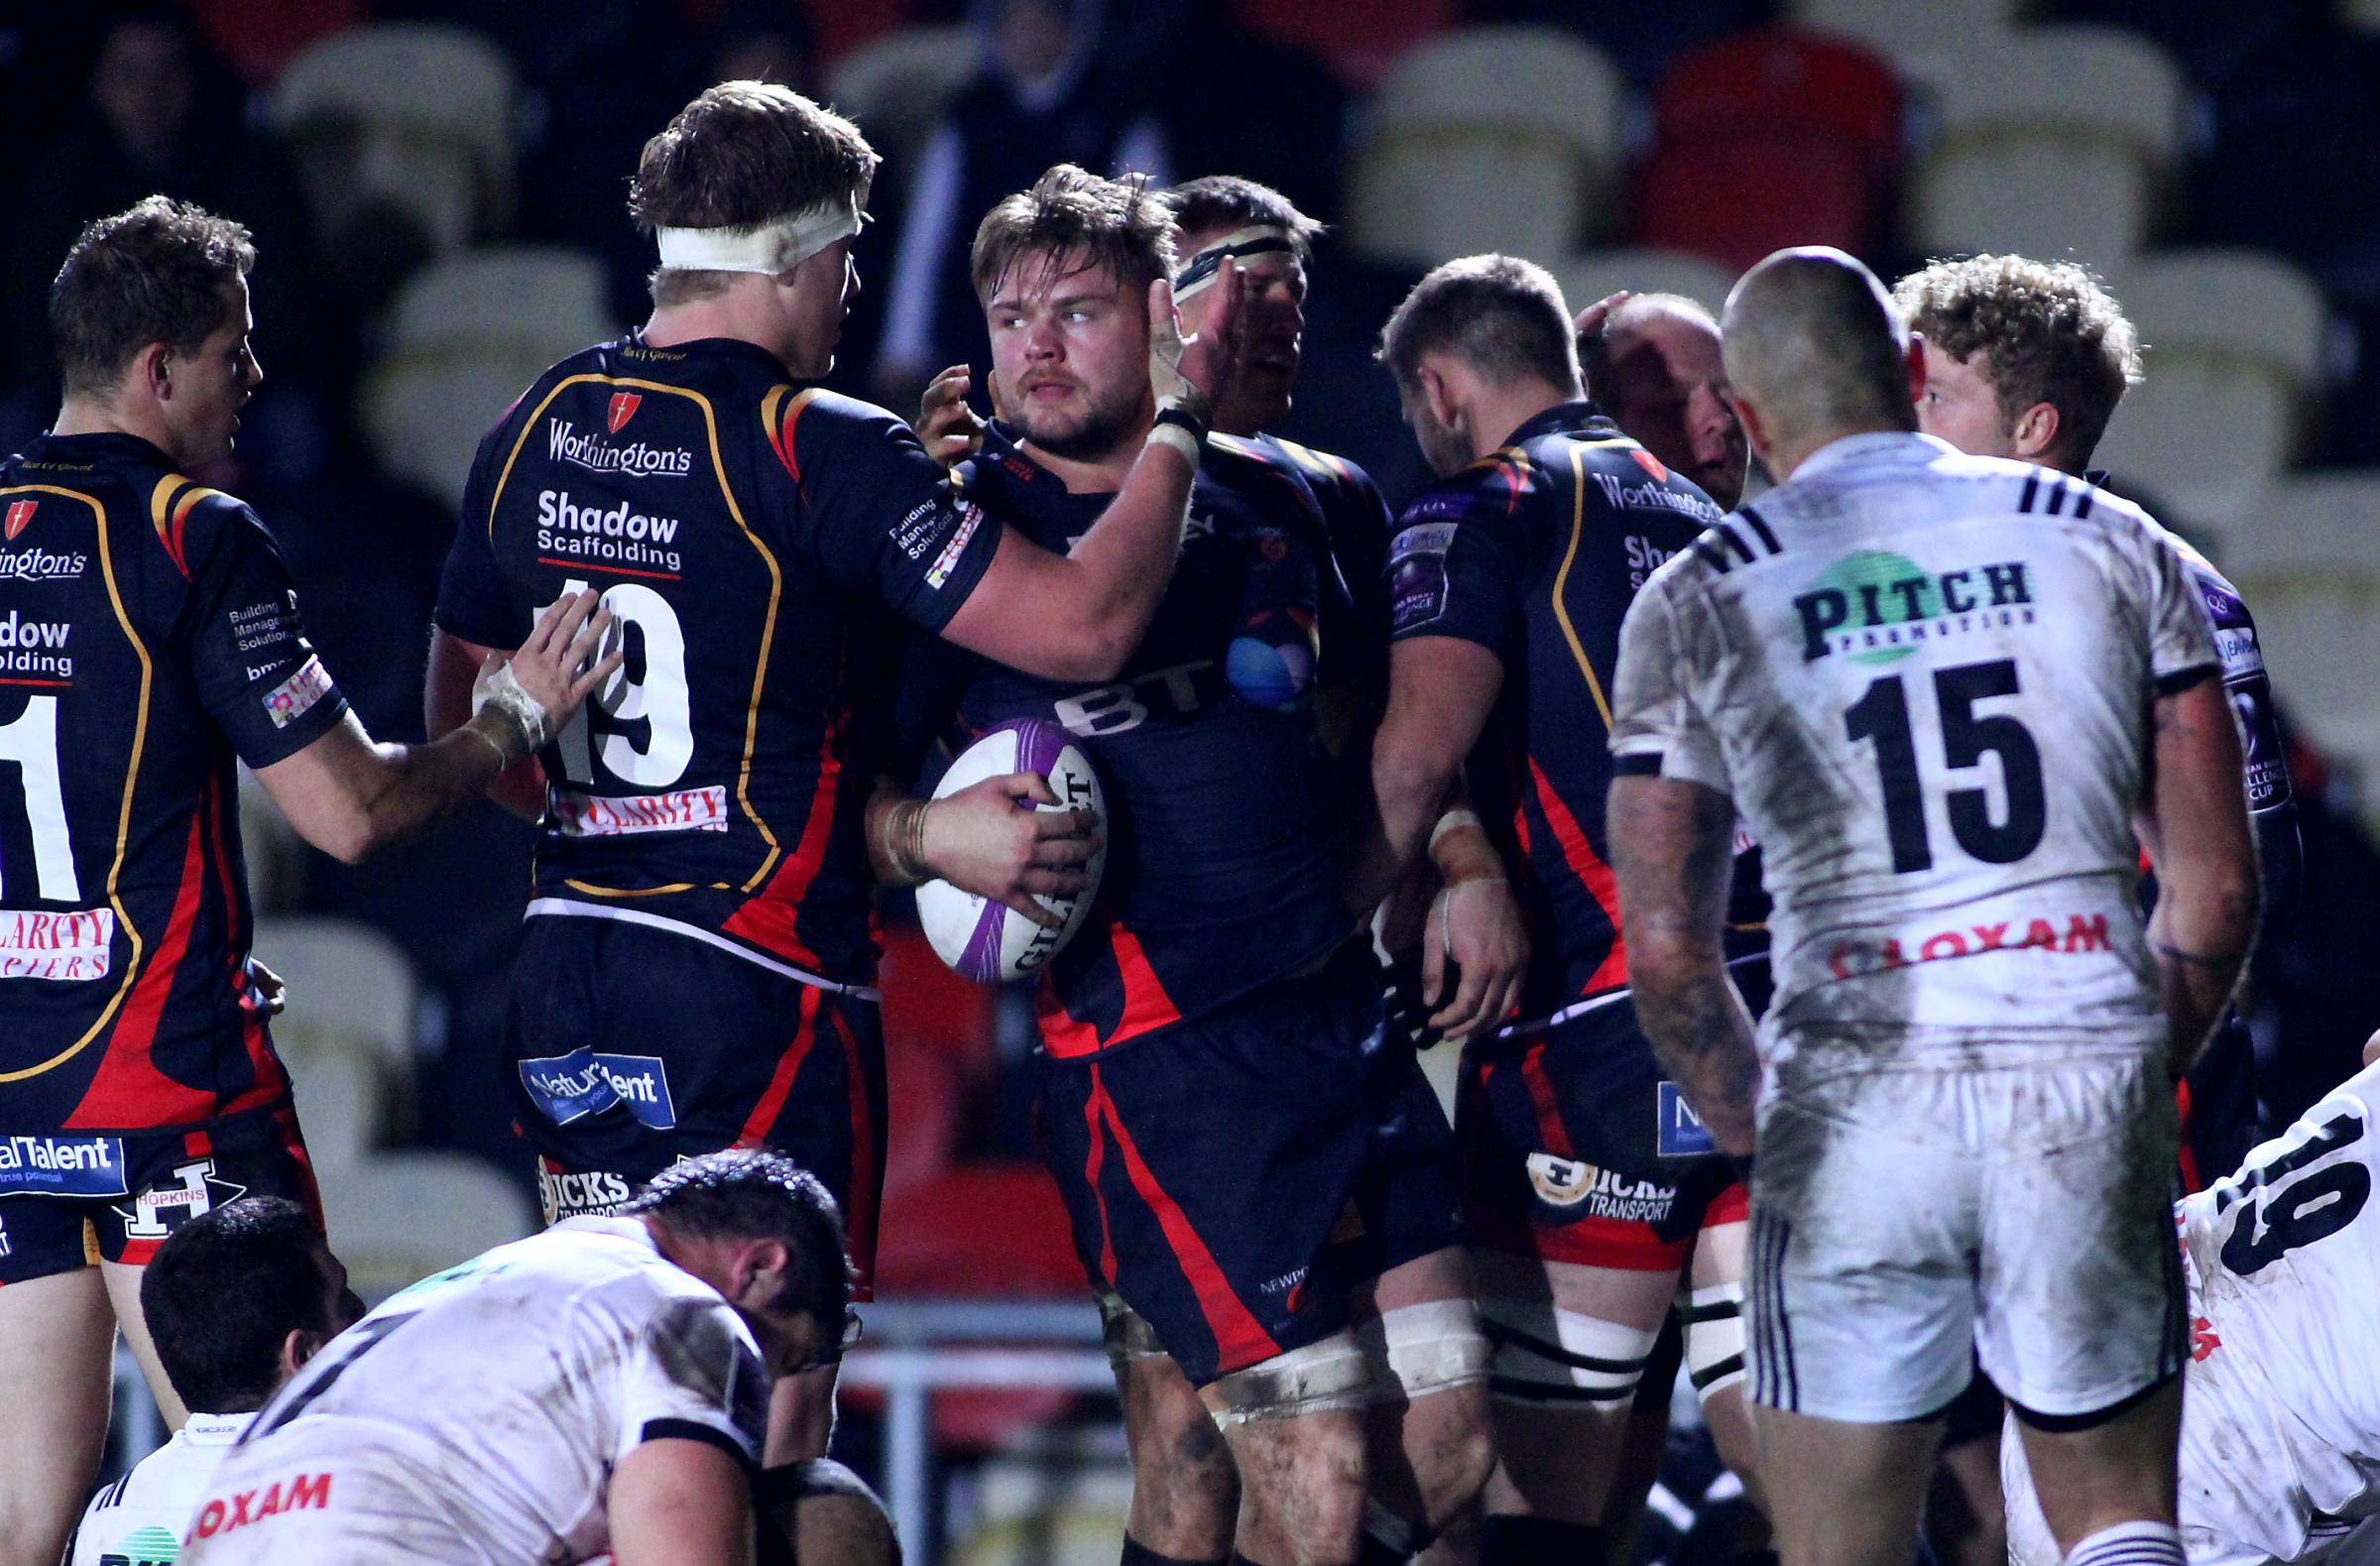 TRY: Celebrating after scoring against Brive, one of 13 tries Ive scored